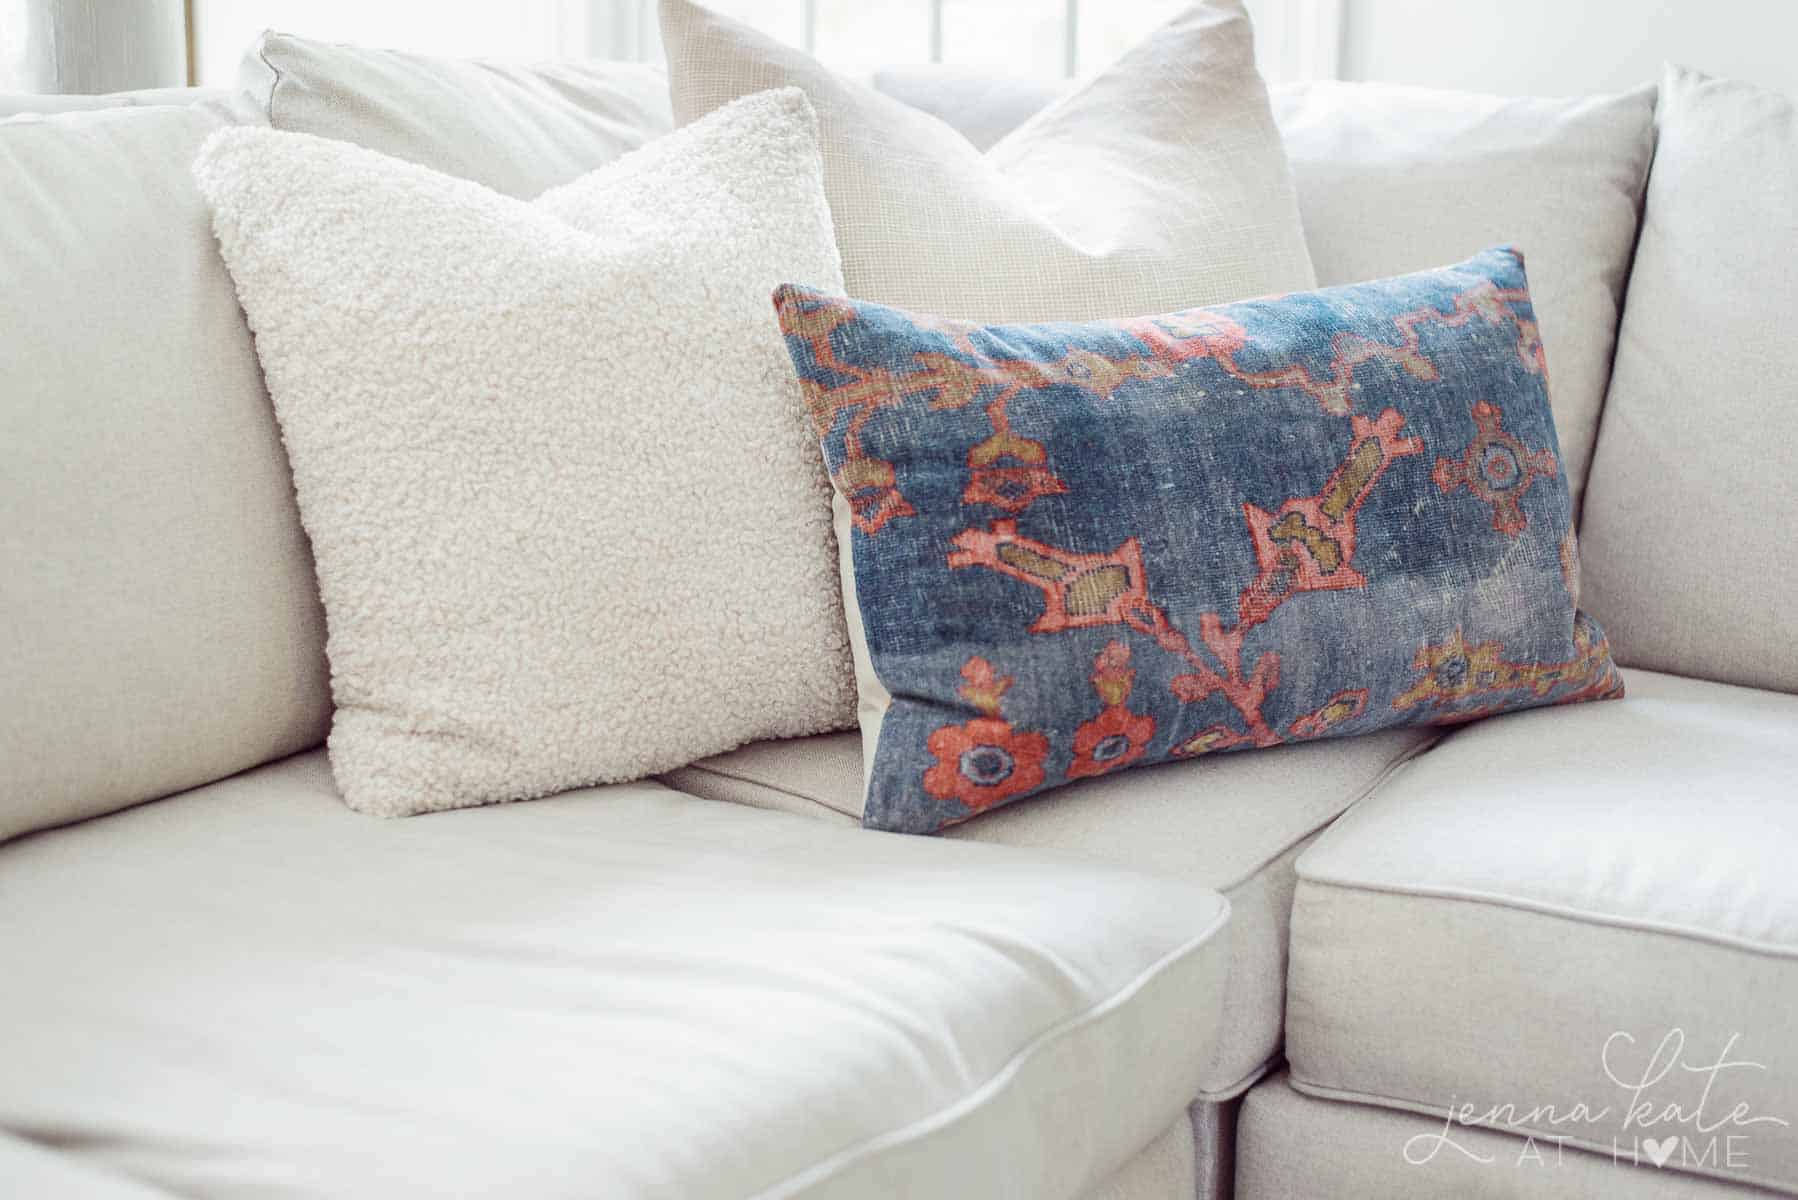 https://www.makingmanzanita.com/wp-content/uploads/2023/05/living-room-pillow-combination-with-different-scale-of-patterns-in-pillows-on-couch.jpg